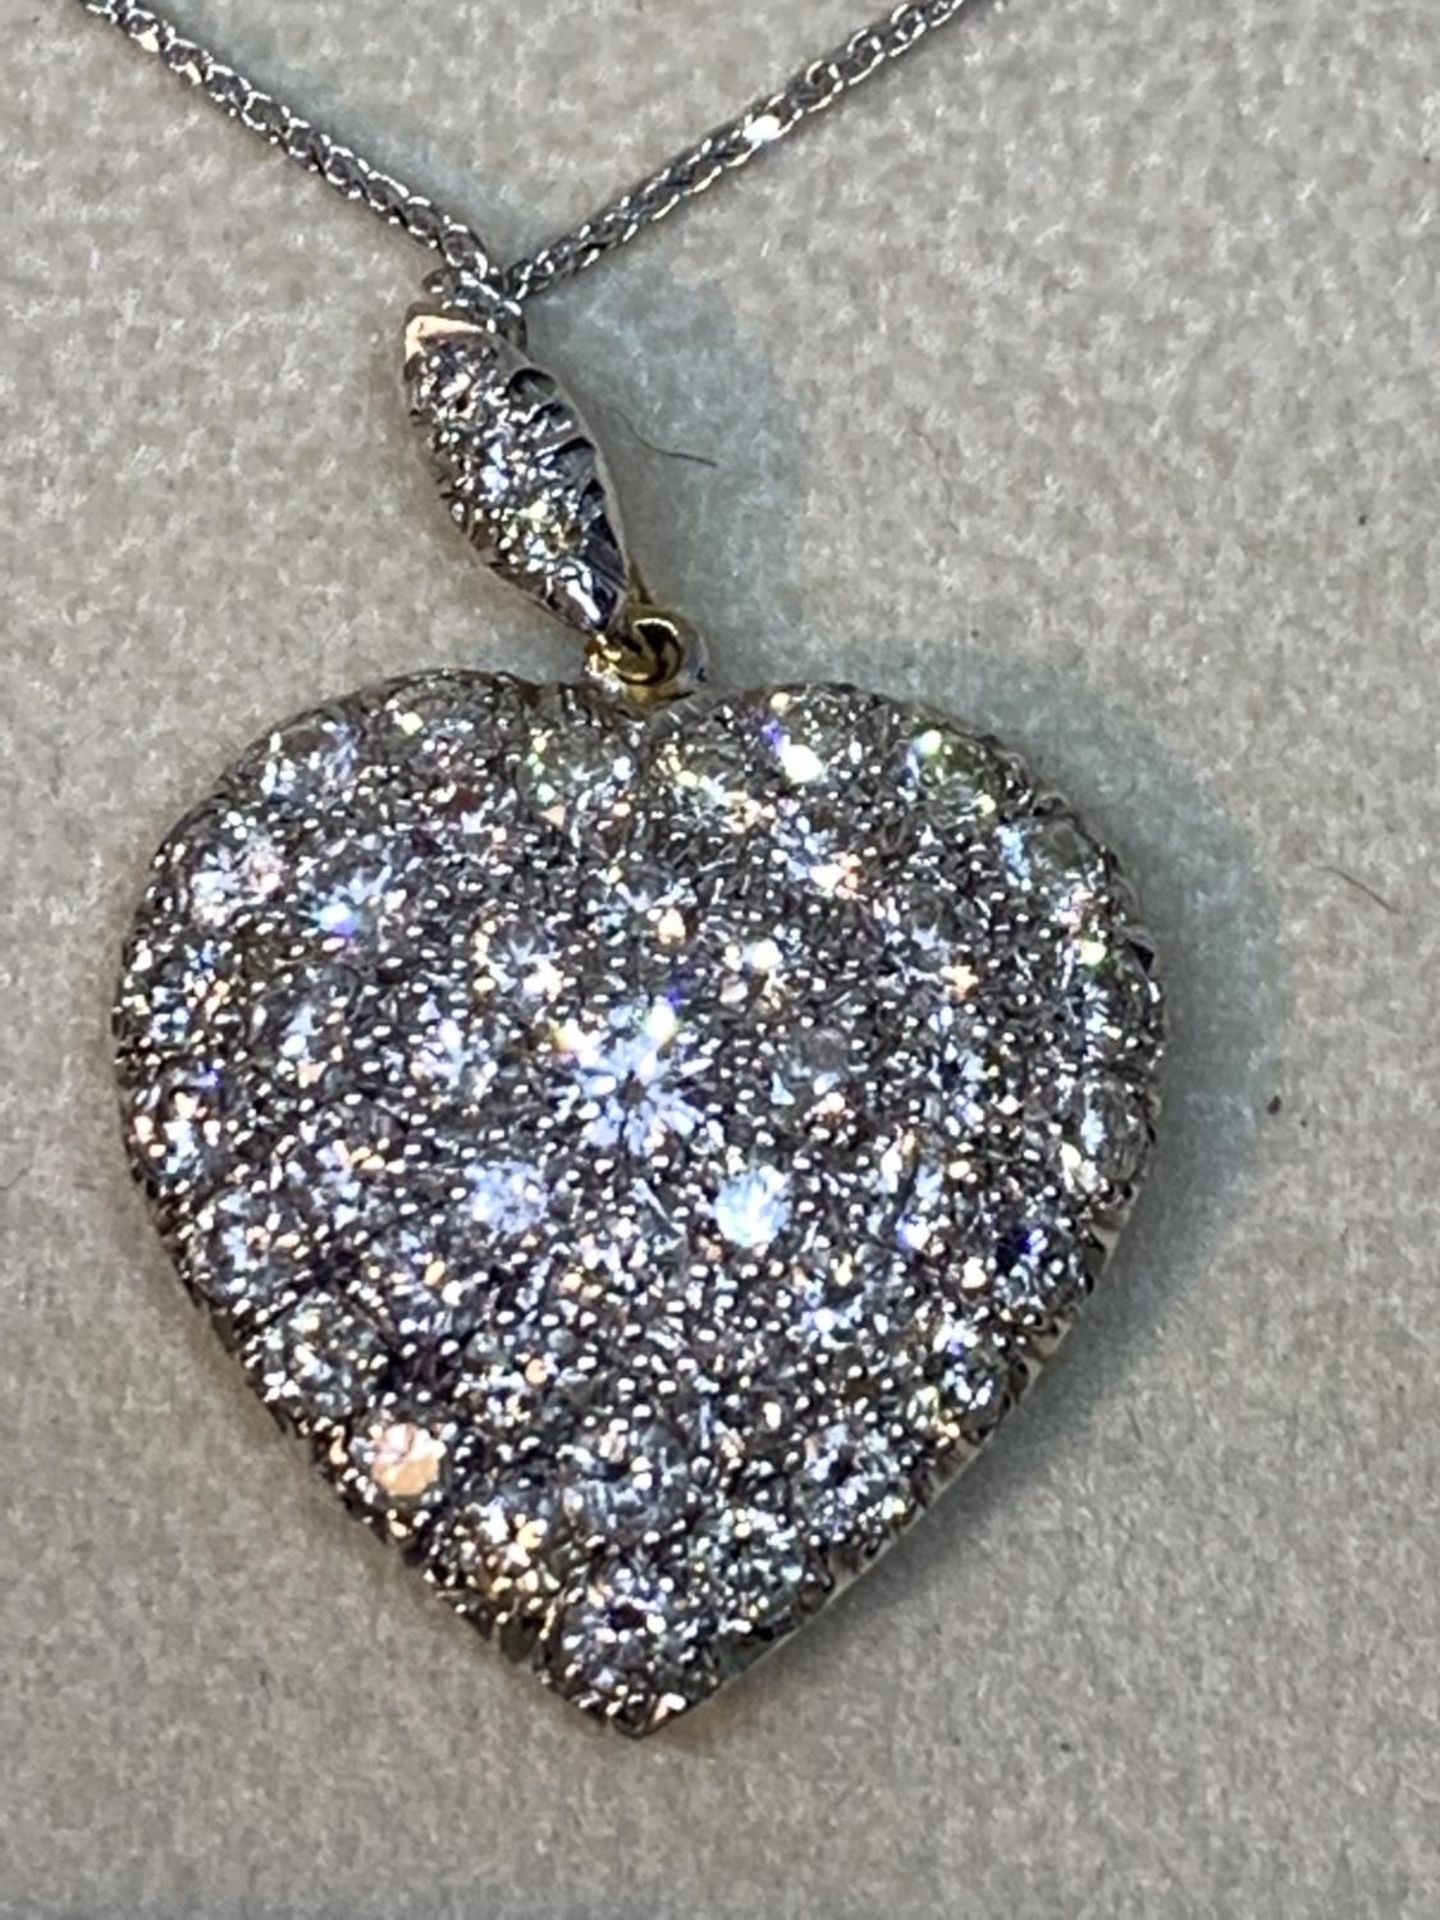 A 15 CARAT WHITE AND YELLOW GOLD LARGE DIAMOND ENCRUSTED HEART PENDANT WITH CHAIN LENGTH 44CM IN A - Image 8 of 8